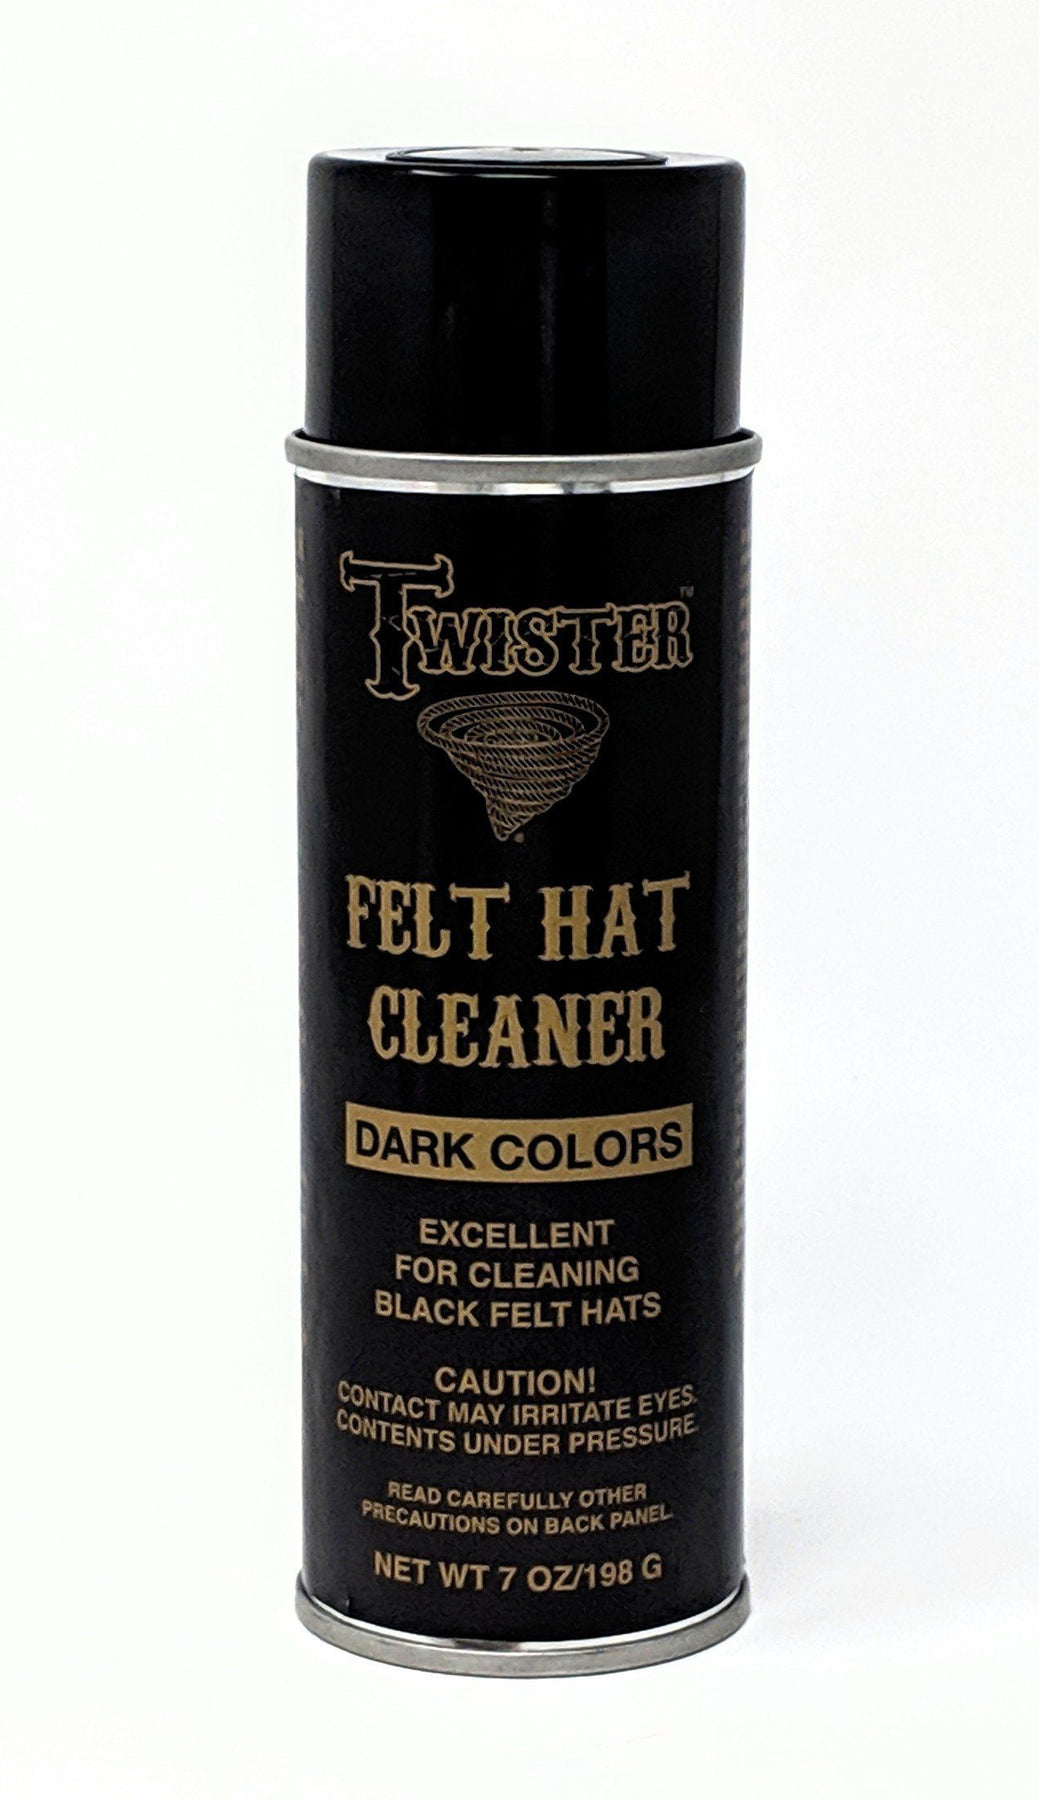 M&F Scout Felt Hat Cleaner for Light Colors Only - 01045 - Leon